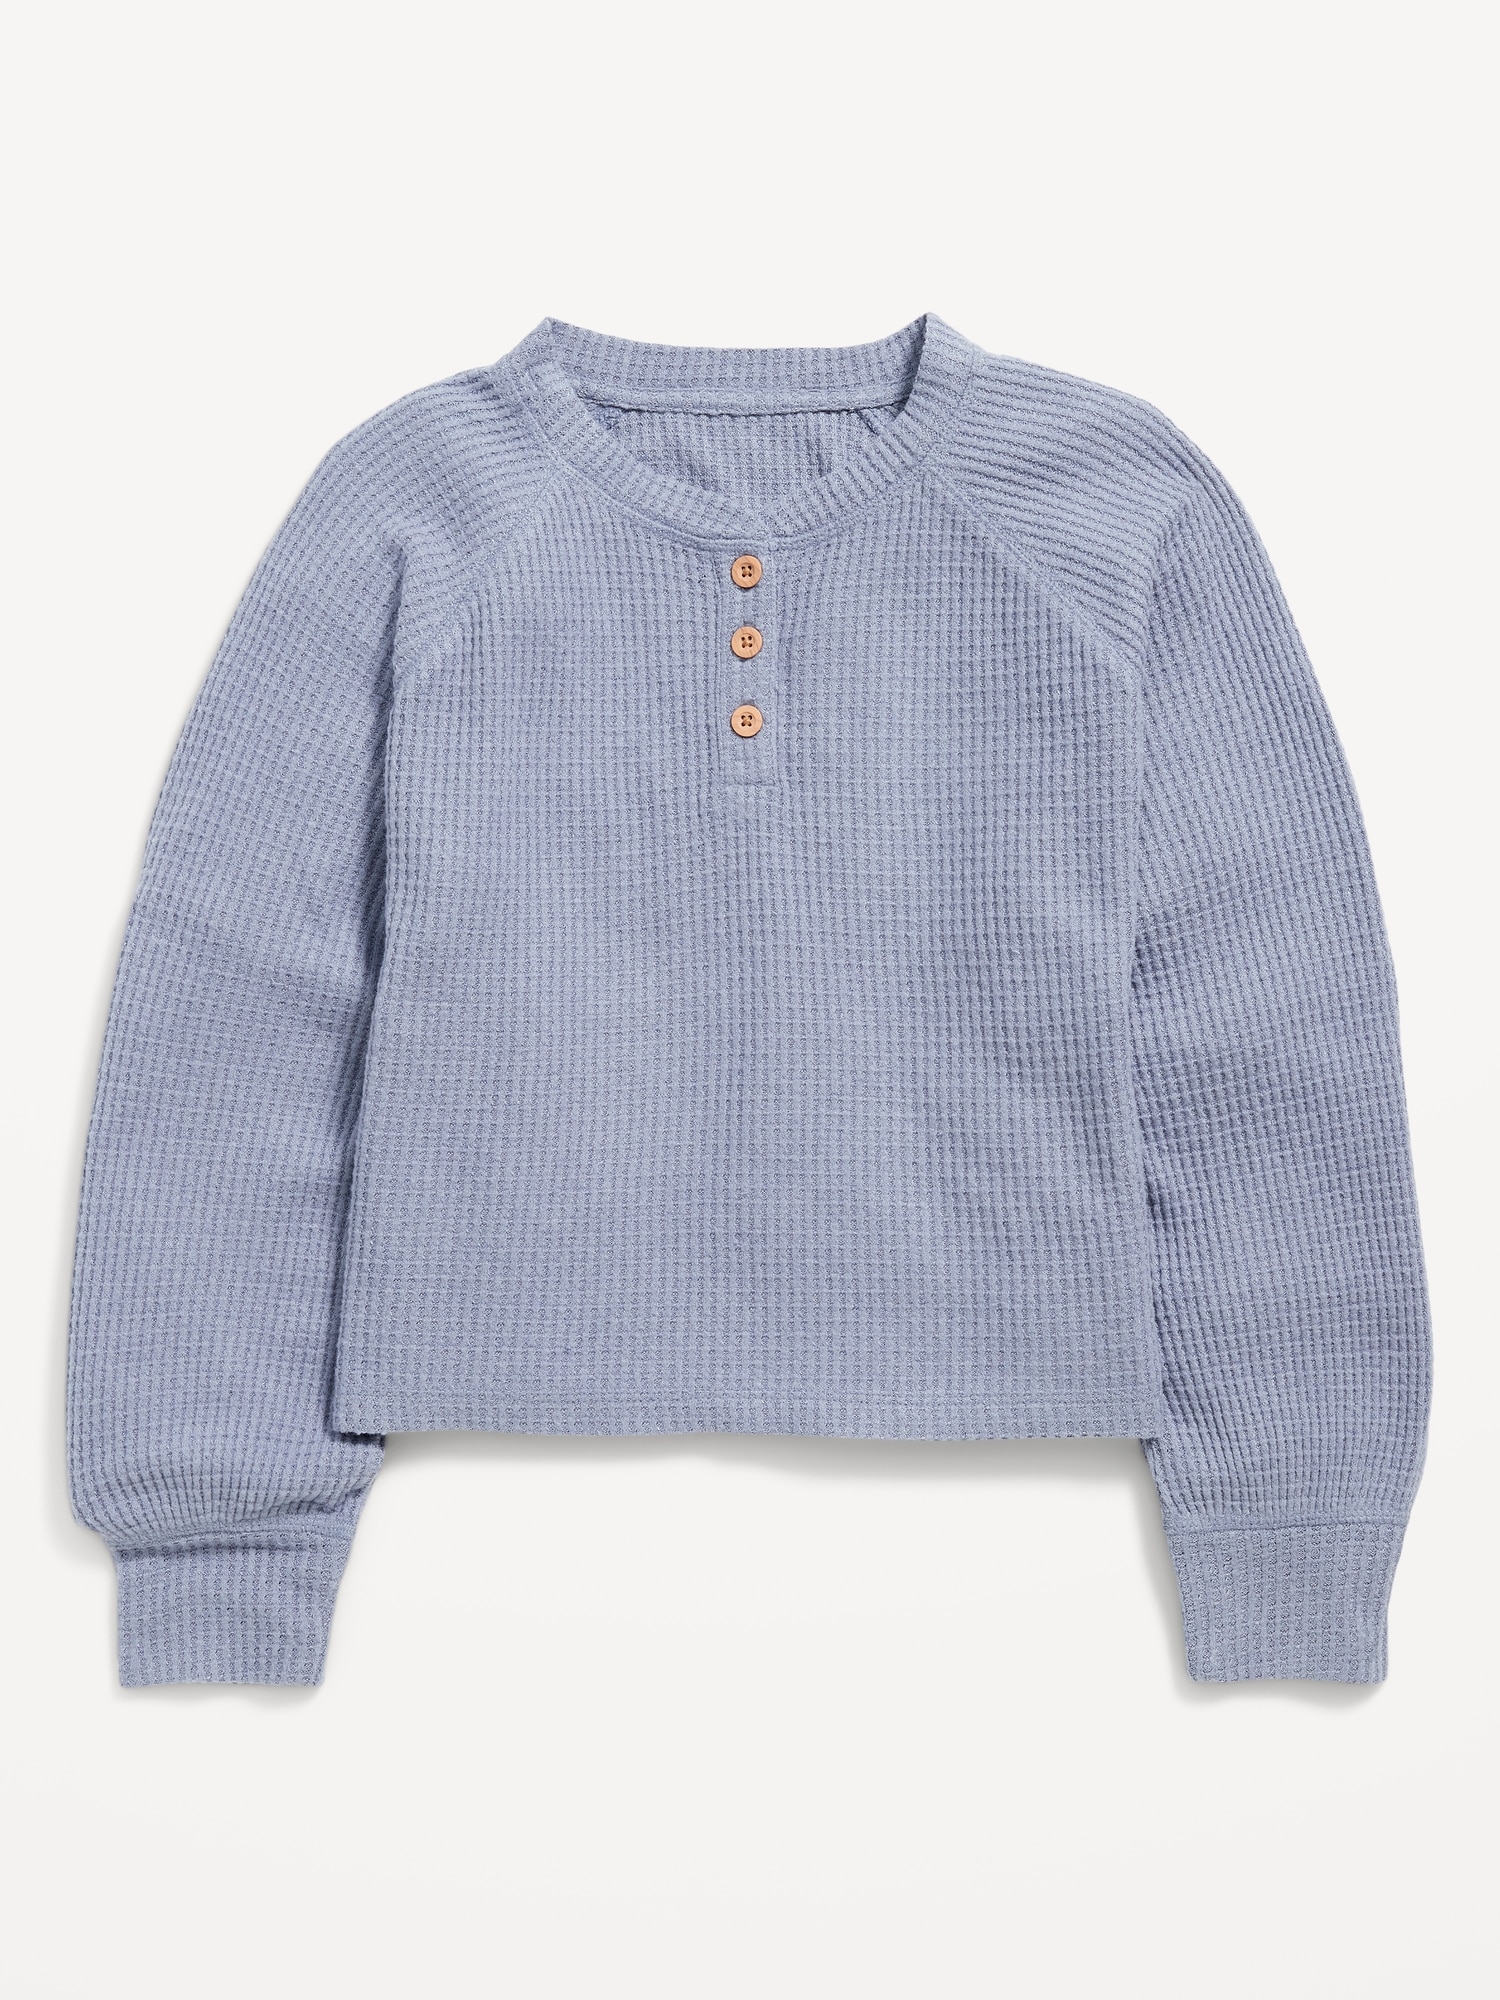 Thermal-Knit Long-Sleeve Henley Top for Girls